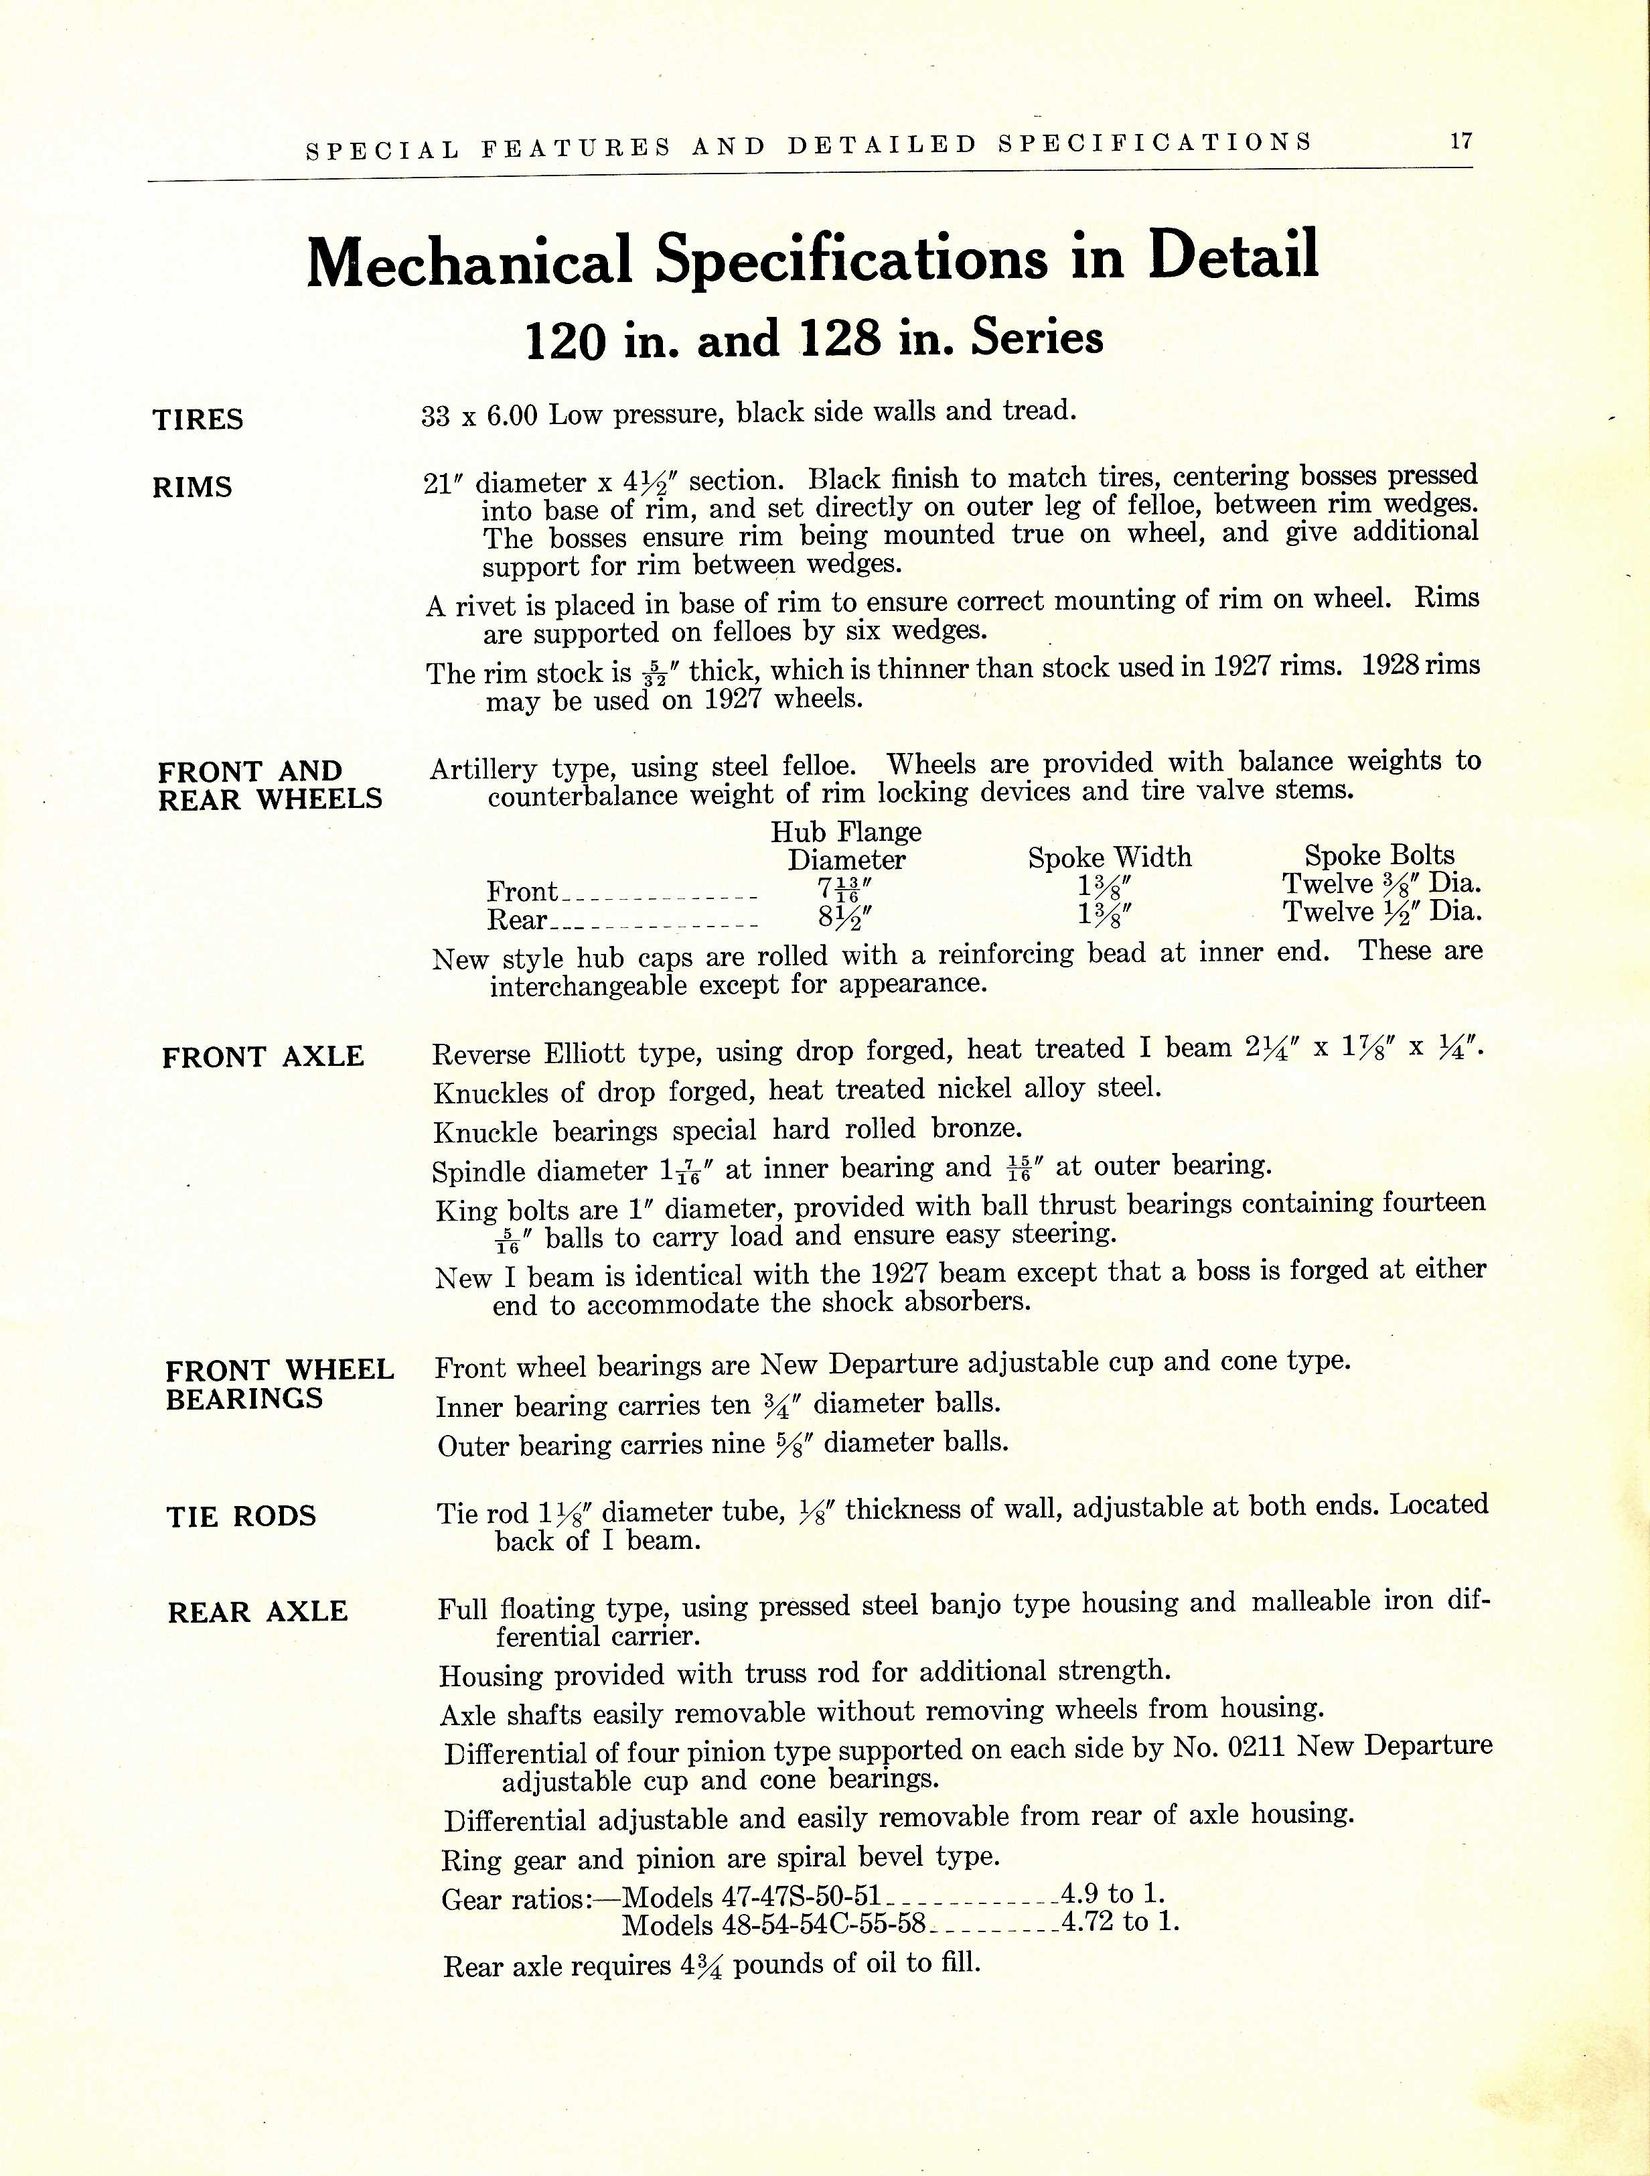 1928 Buick Special Features and  Specs-17